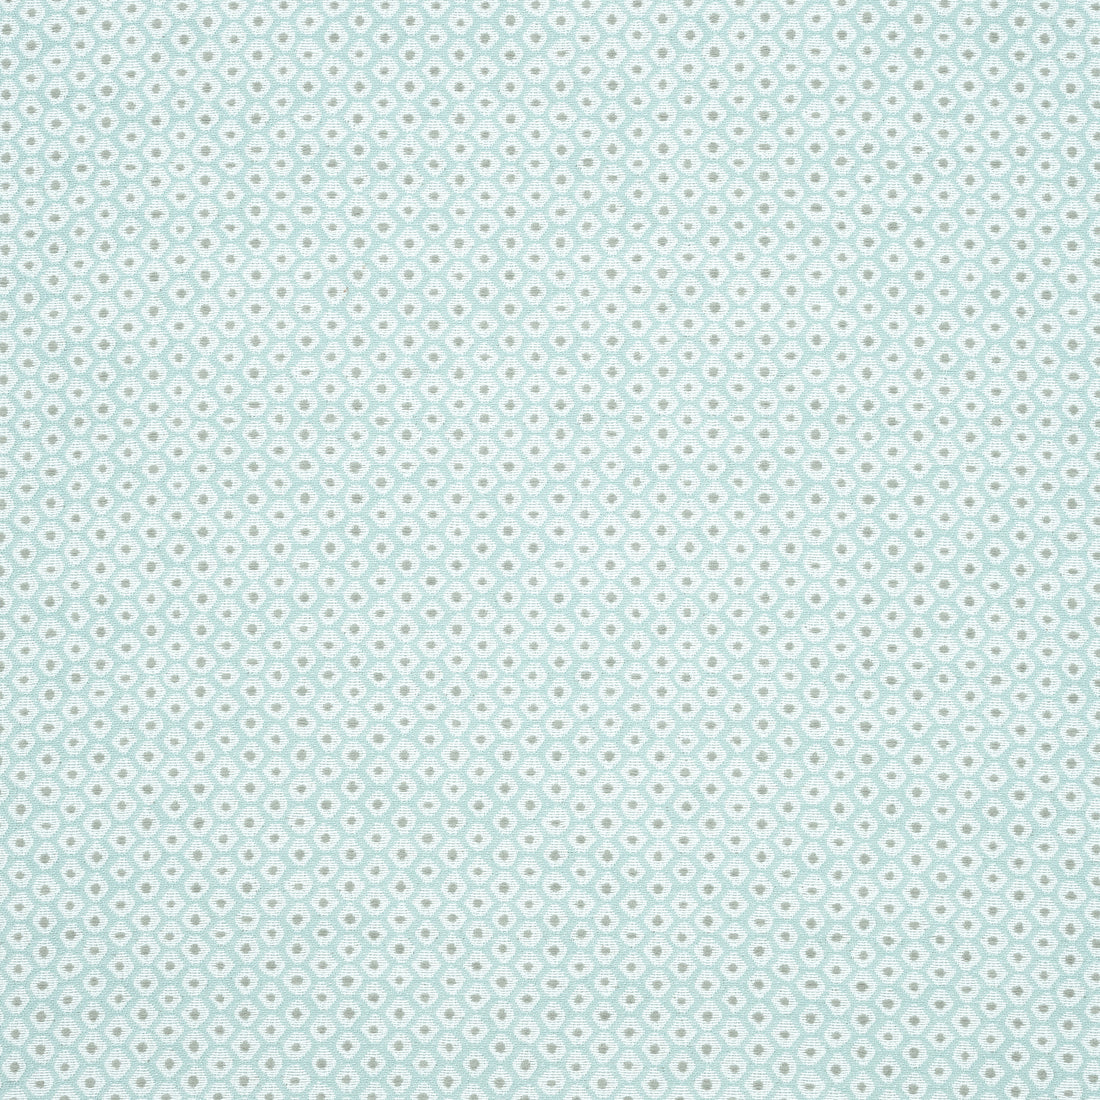 Pixie fabric in seafoam and sterling color - pattern number W73465 - by Thibaut in the Landmark collection